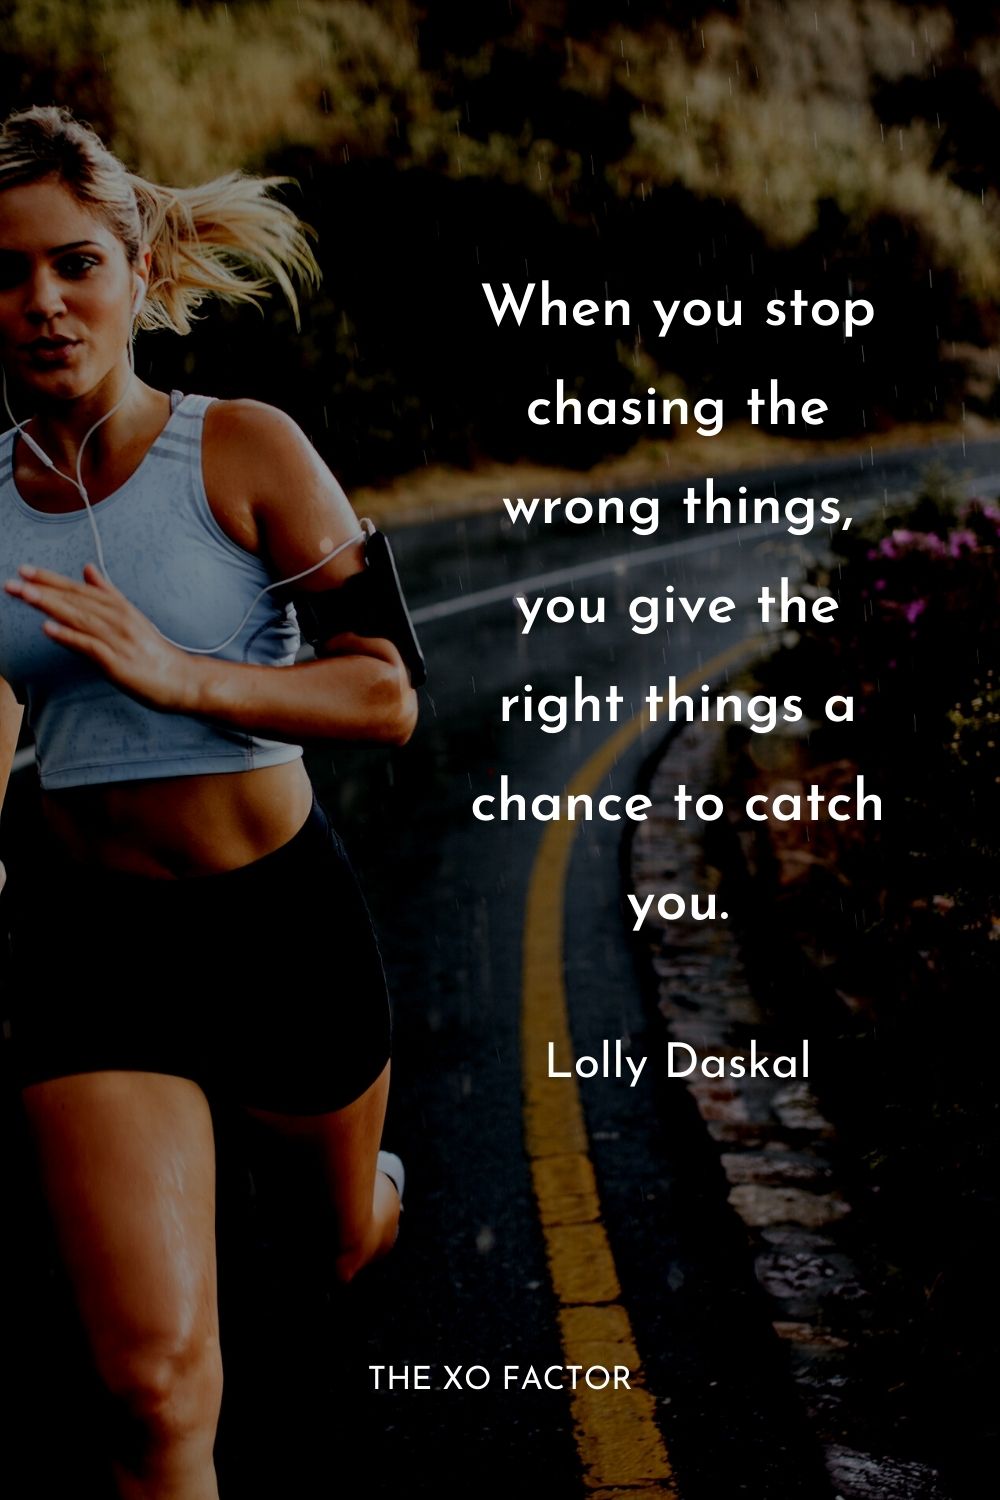 When you stop chasing the wrong things, you give the right things a chance to catch you.